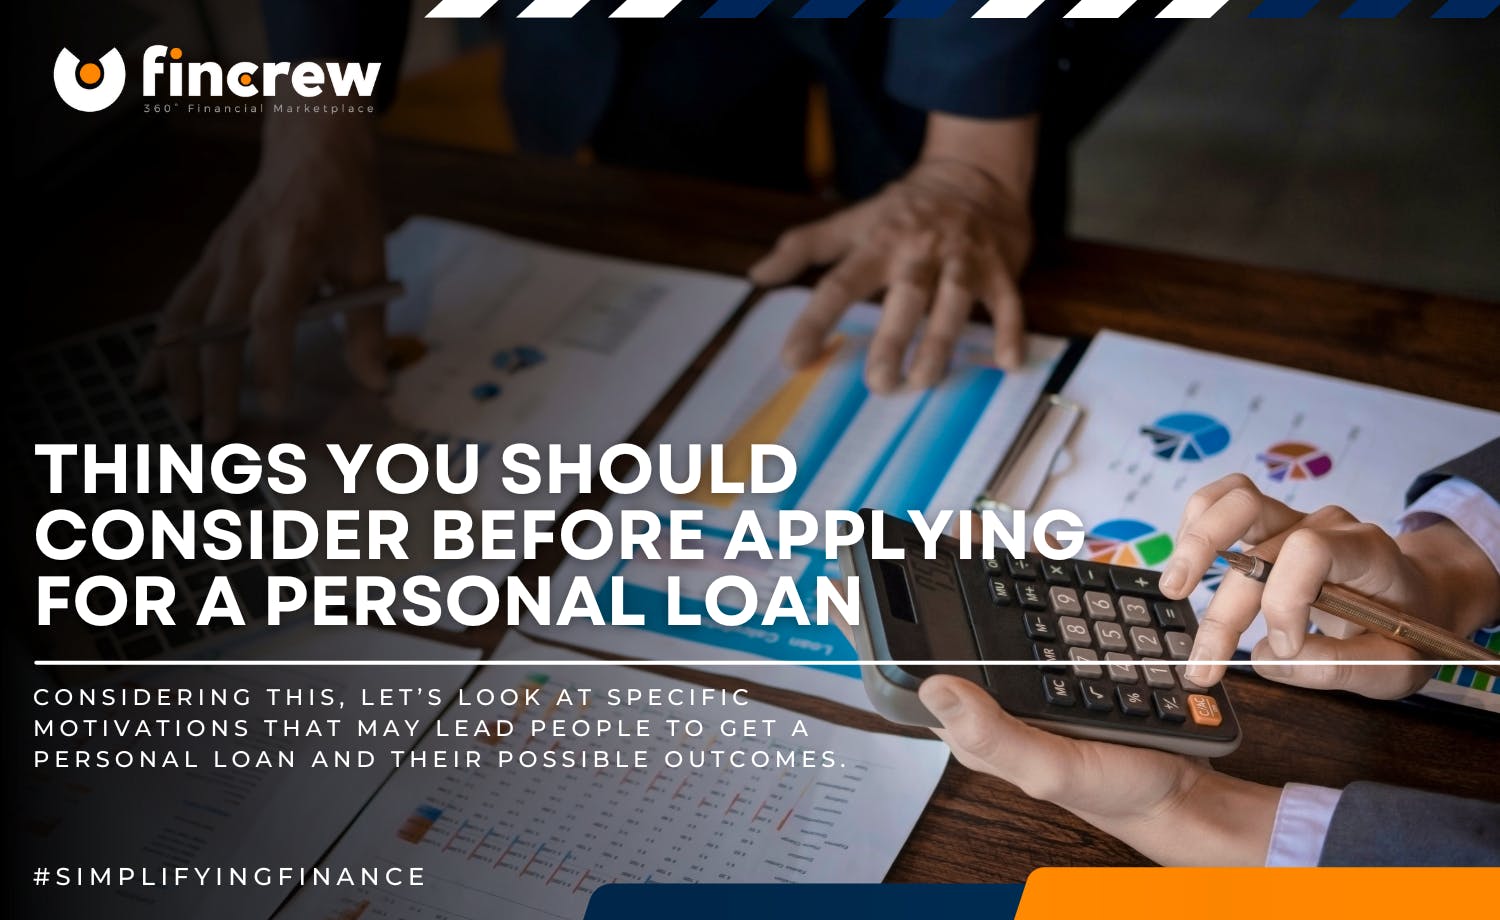 Things You Should Consider Before Applying For a Personal Loan